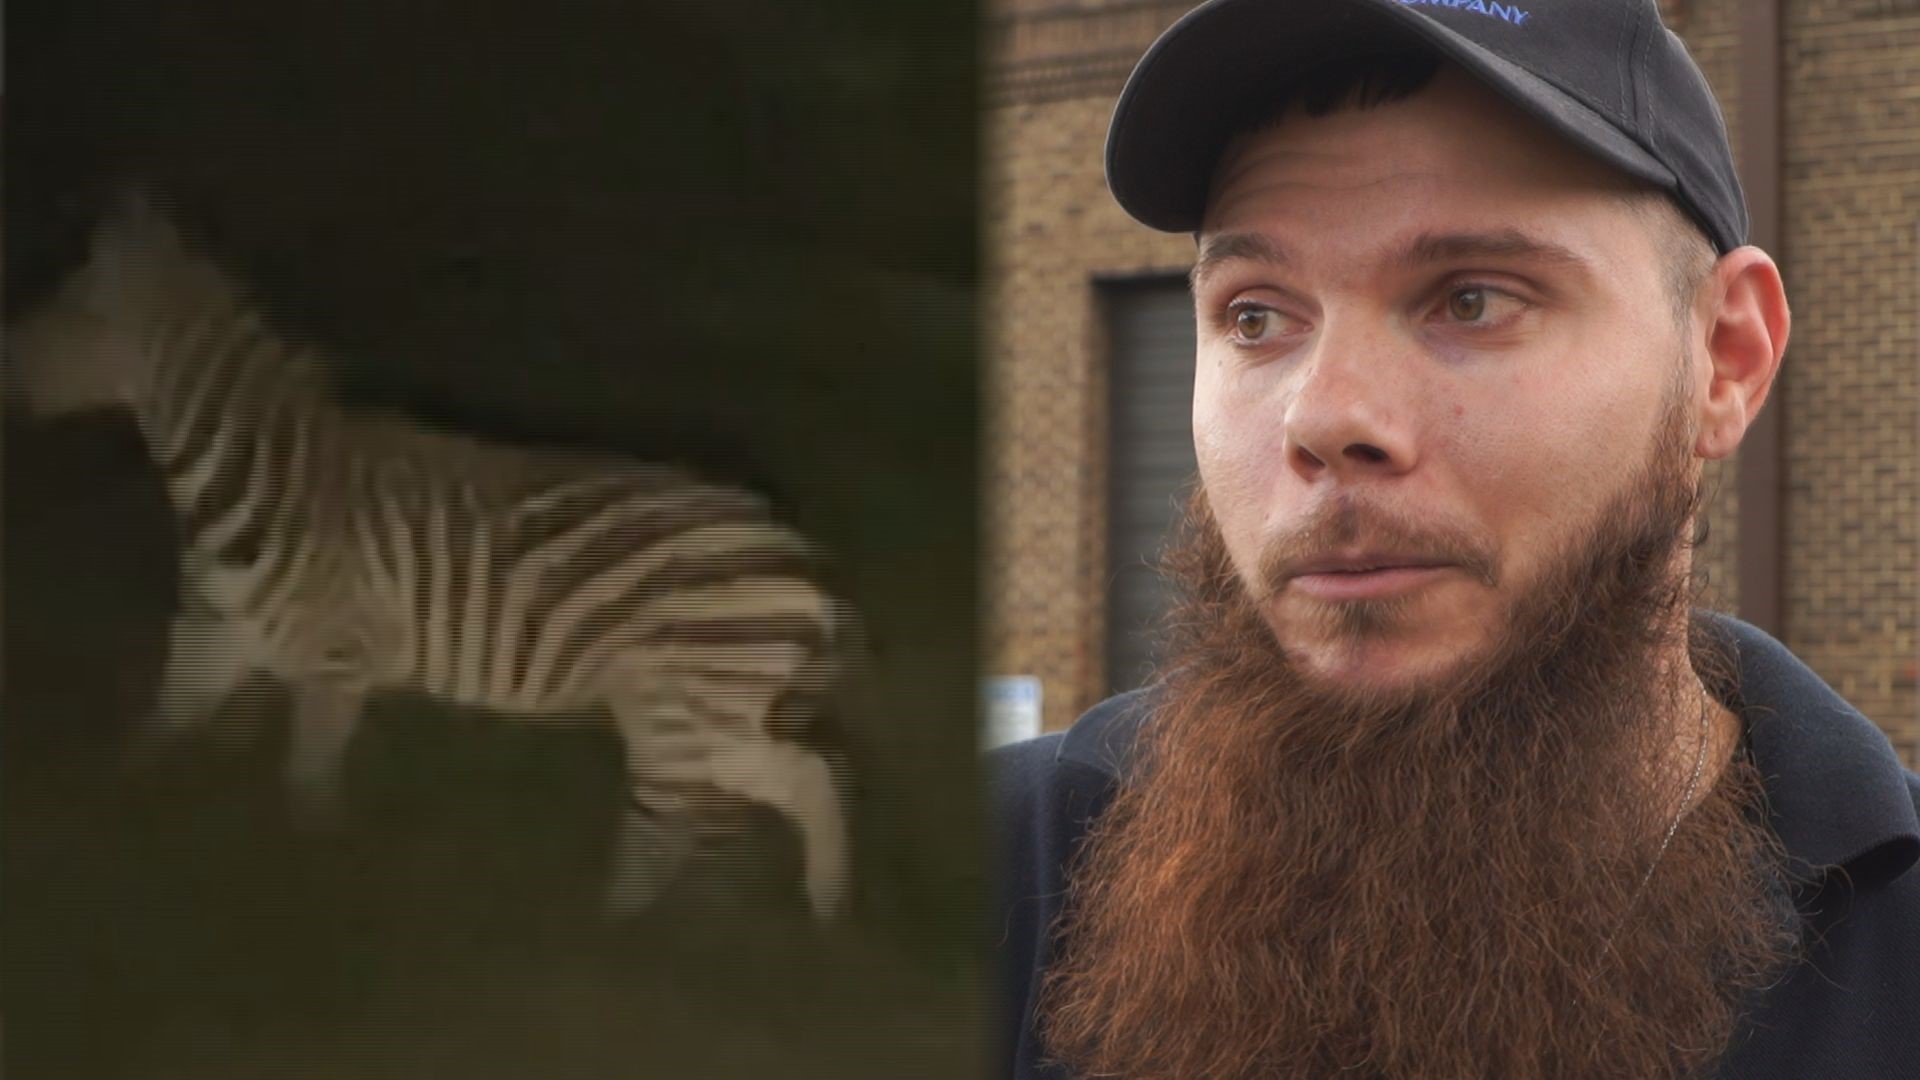 The latest zebra video, recorded by Chris Horrell of Upper Marlboro, will soon exceed 1 million views on Twitter alone.